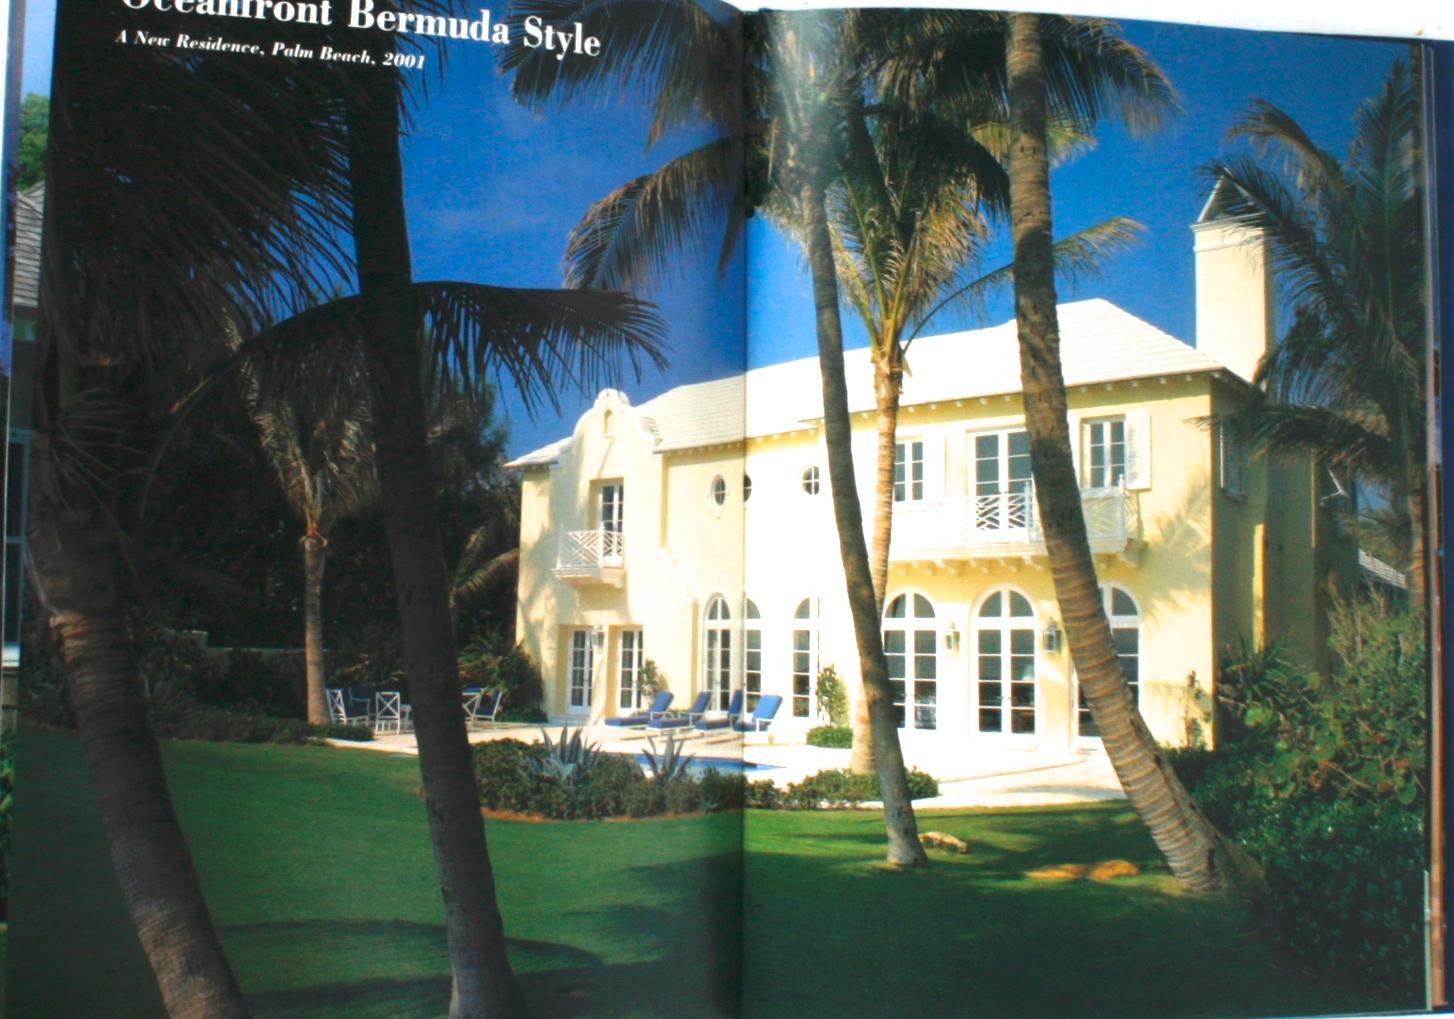 “Palm Beach Splendor, The Architecture of Jeffrey W. Smith” Signed First Edition 7